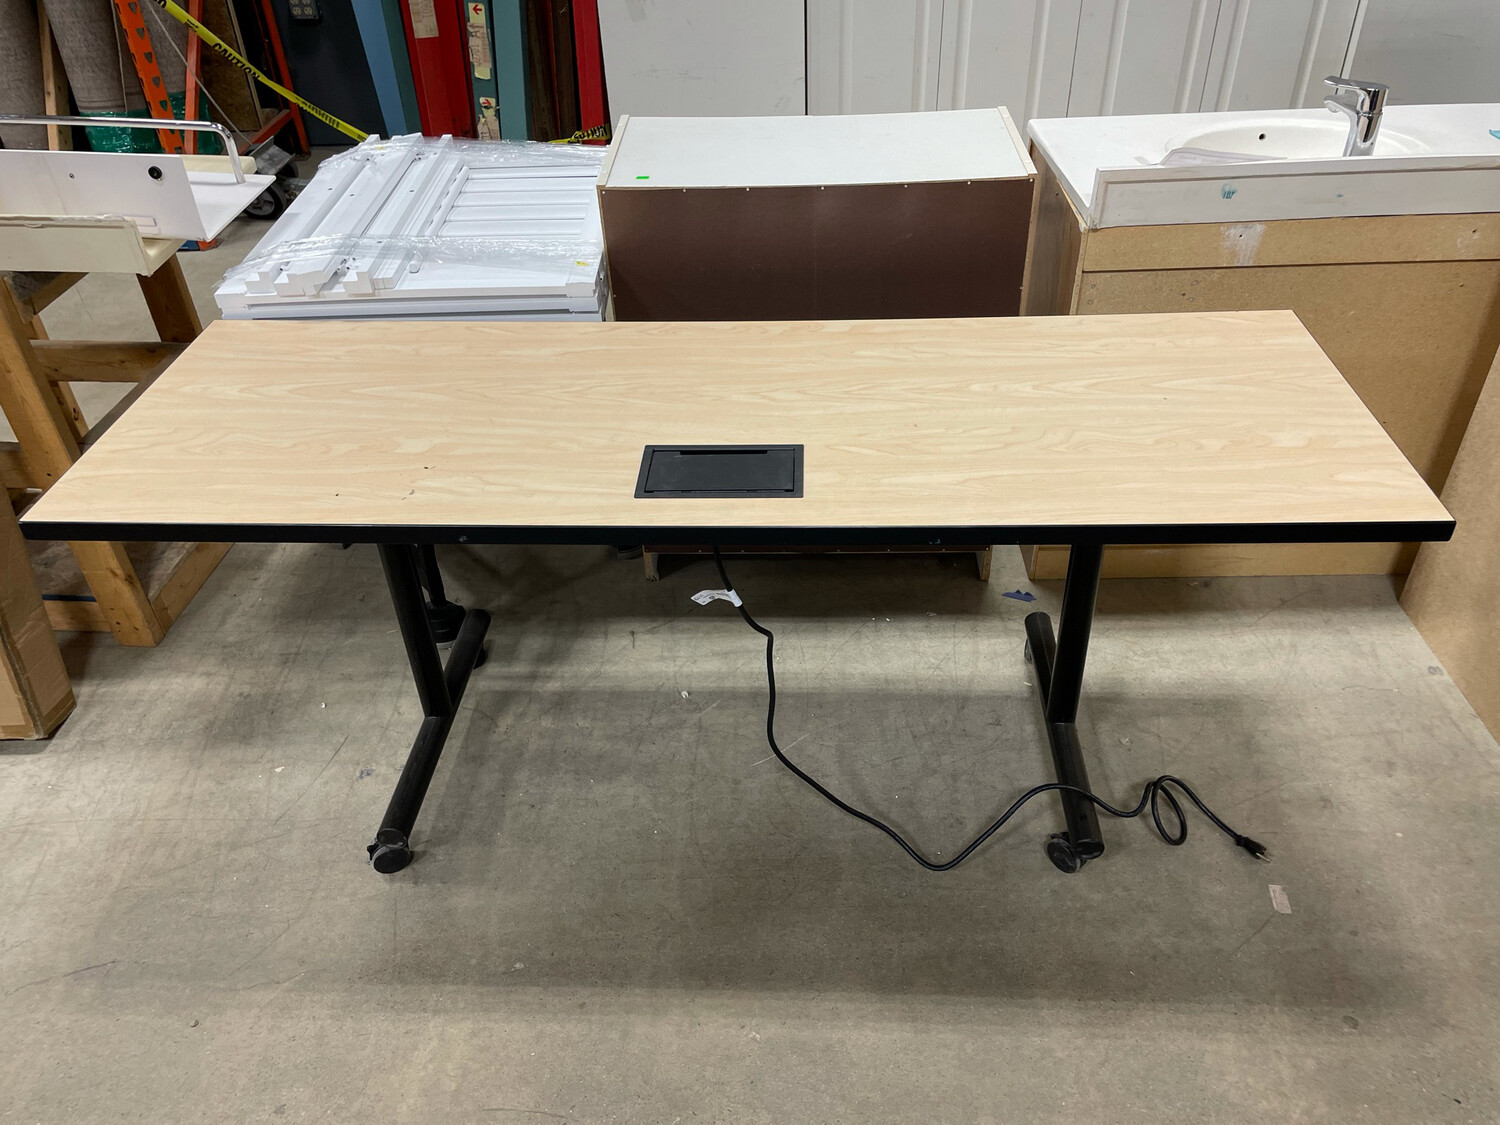 Powered Rolling Table